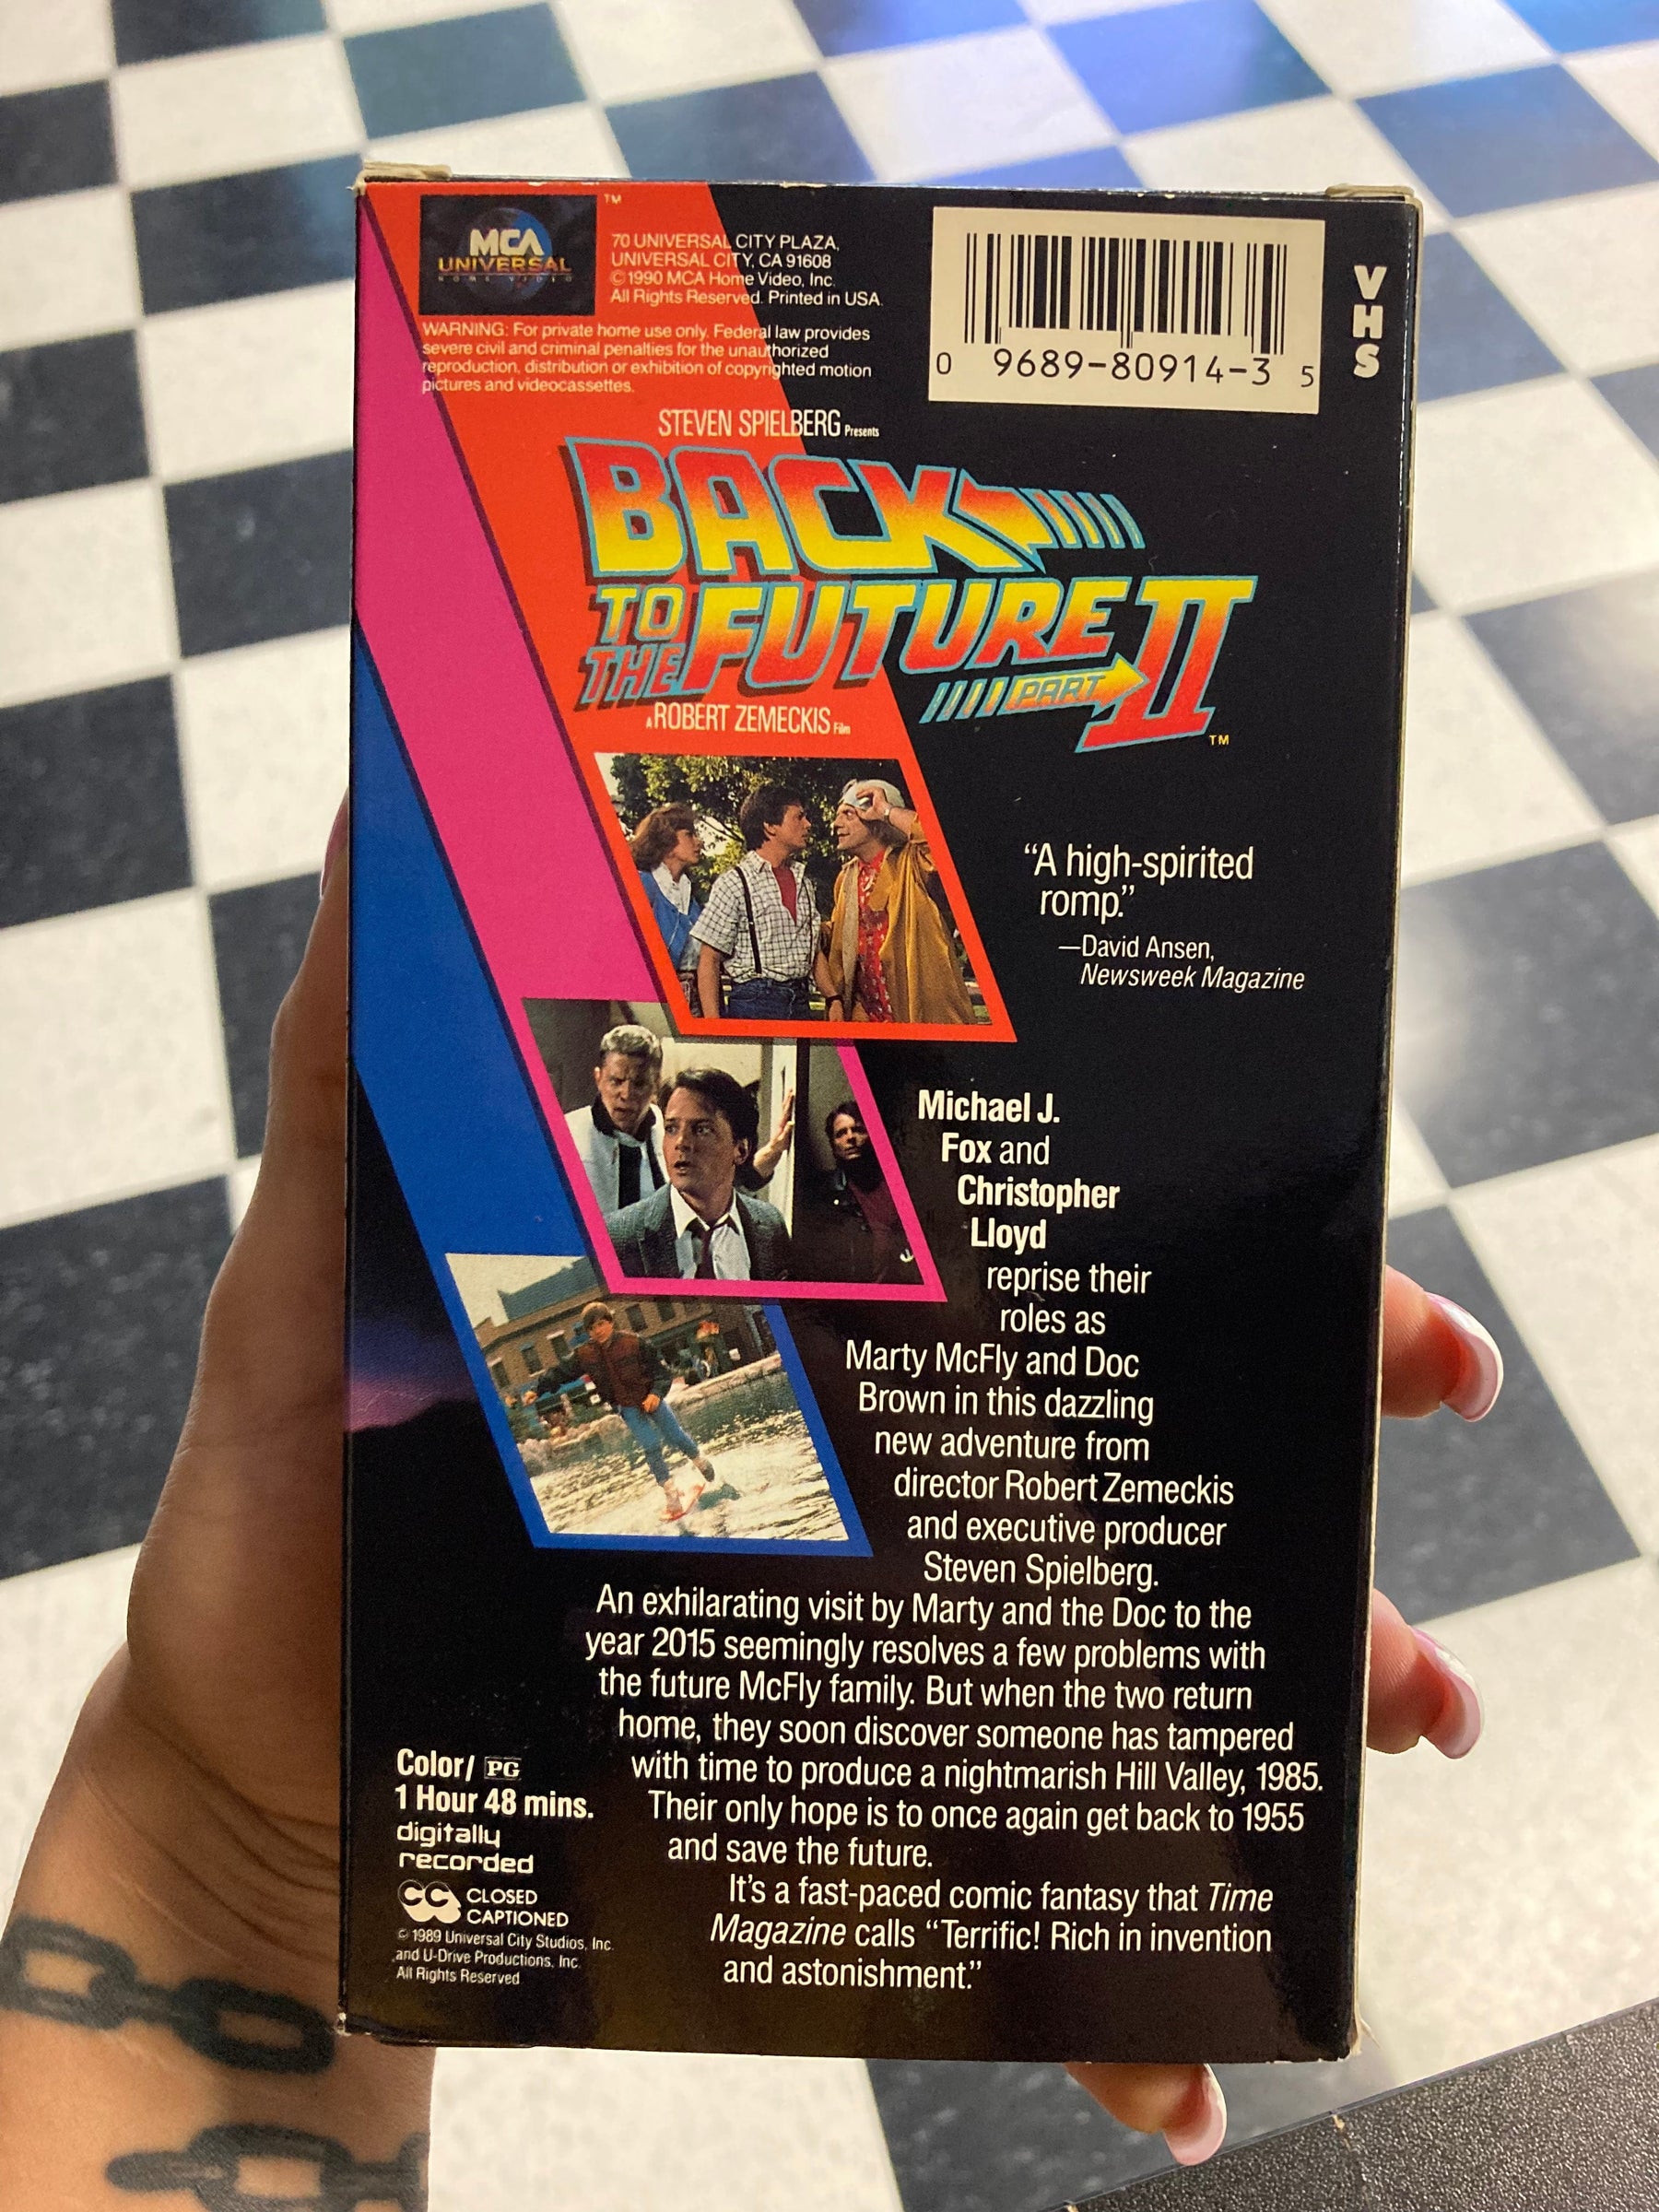 Back to the Future – Universal Pictures Home Entertainment